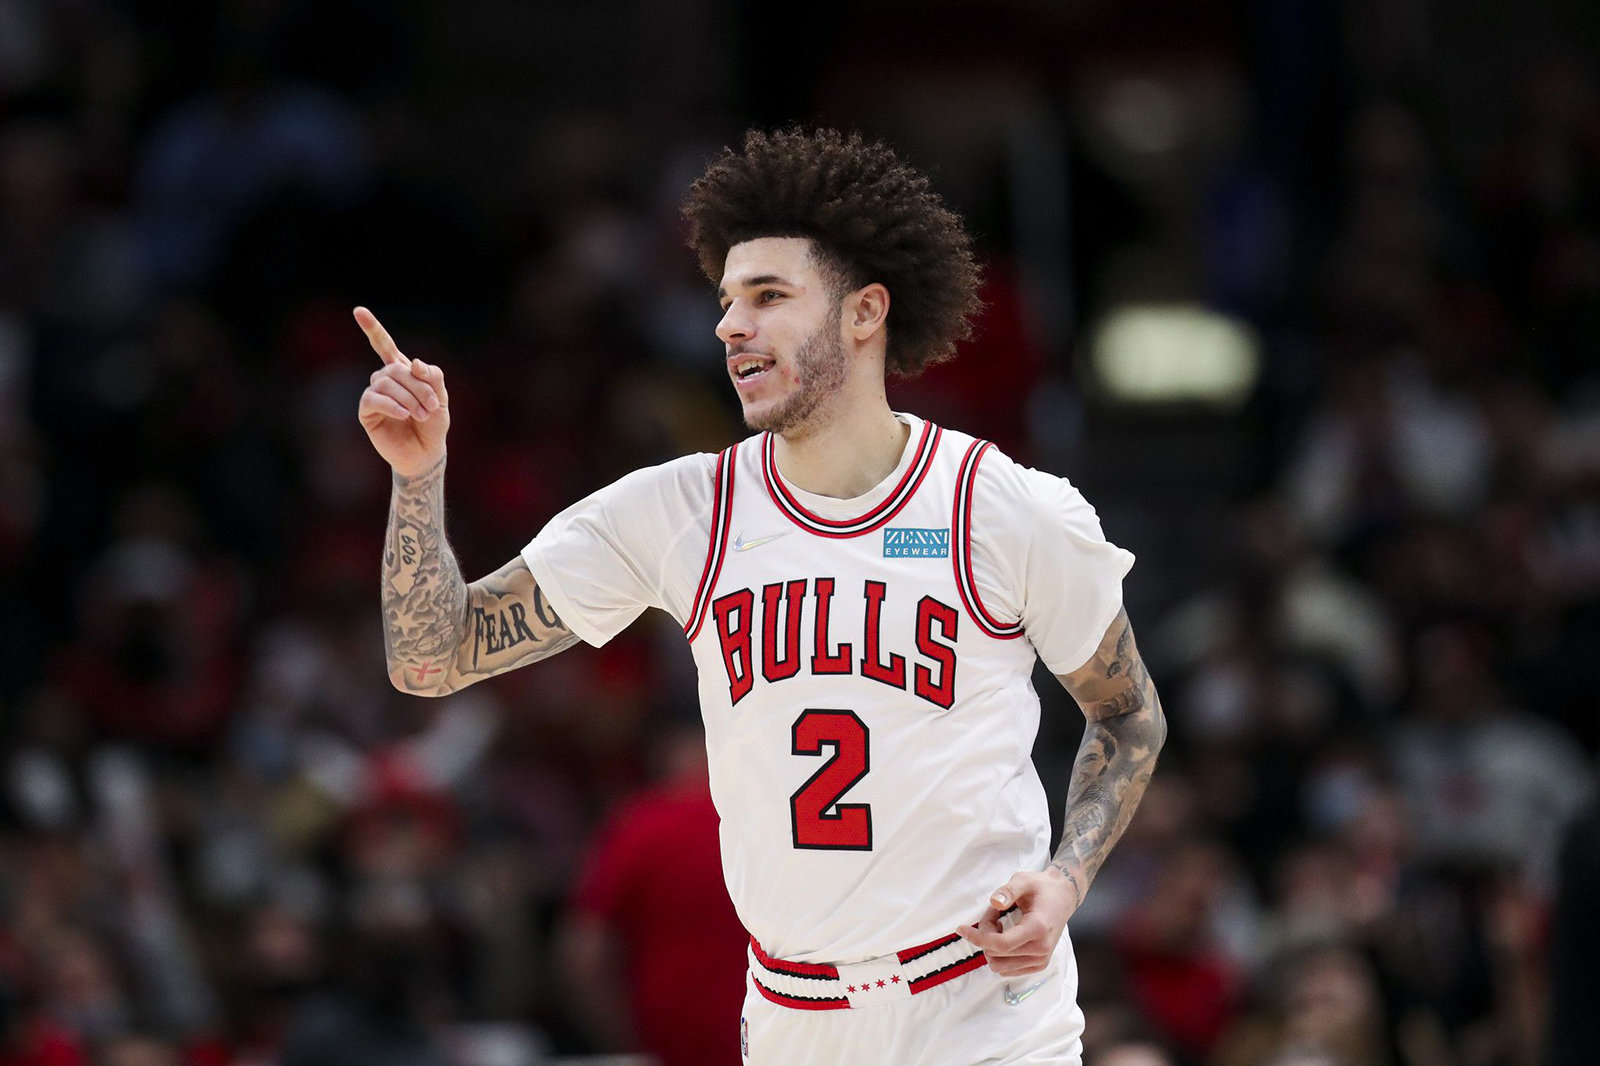 Chicago Bulls point guard Lonzo Ball celebrates a basket during an NBA game against the Detroit Pistons in January 2022